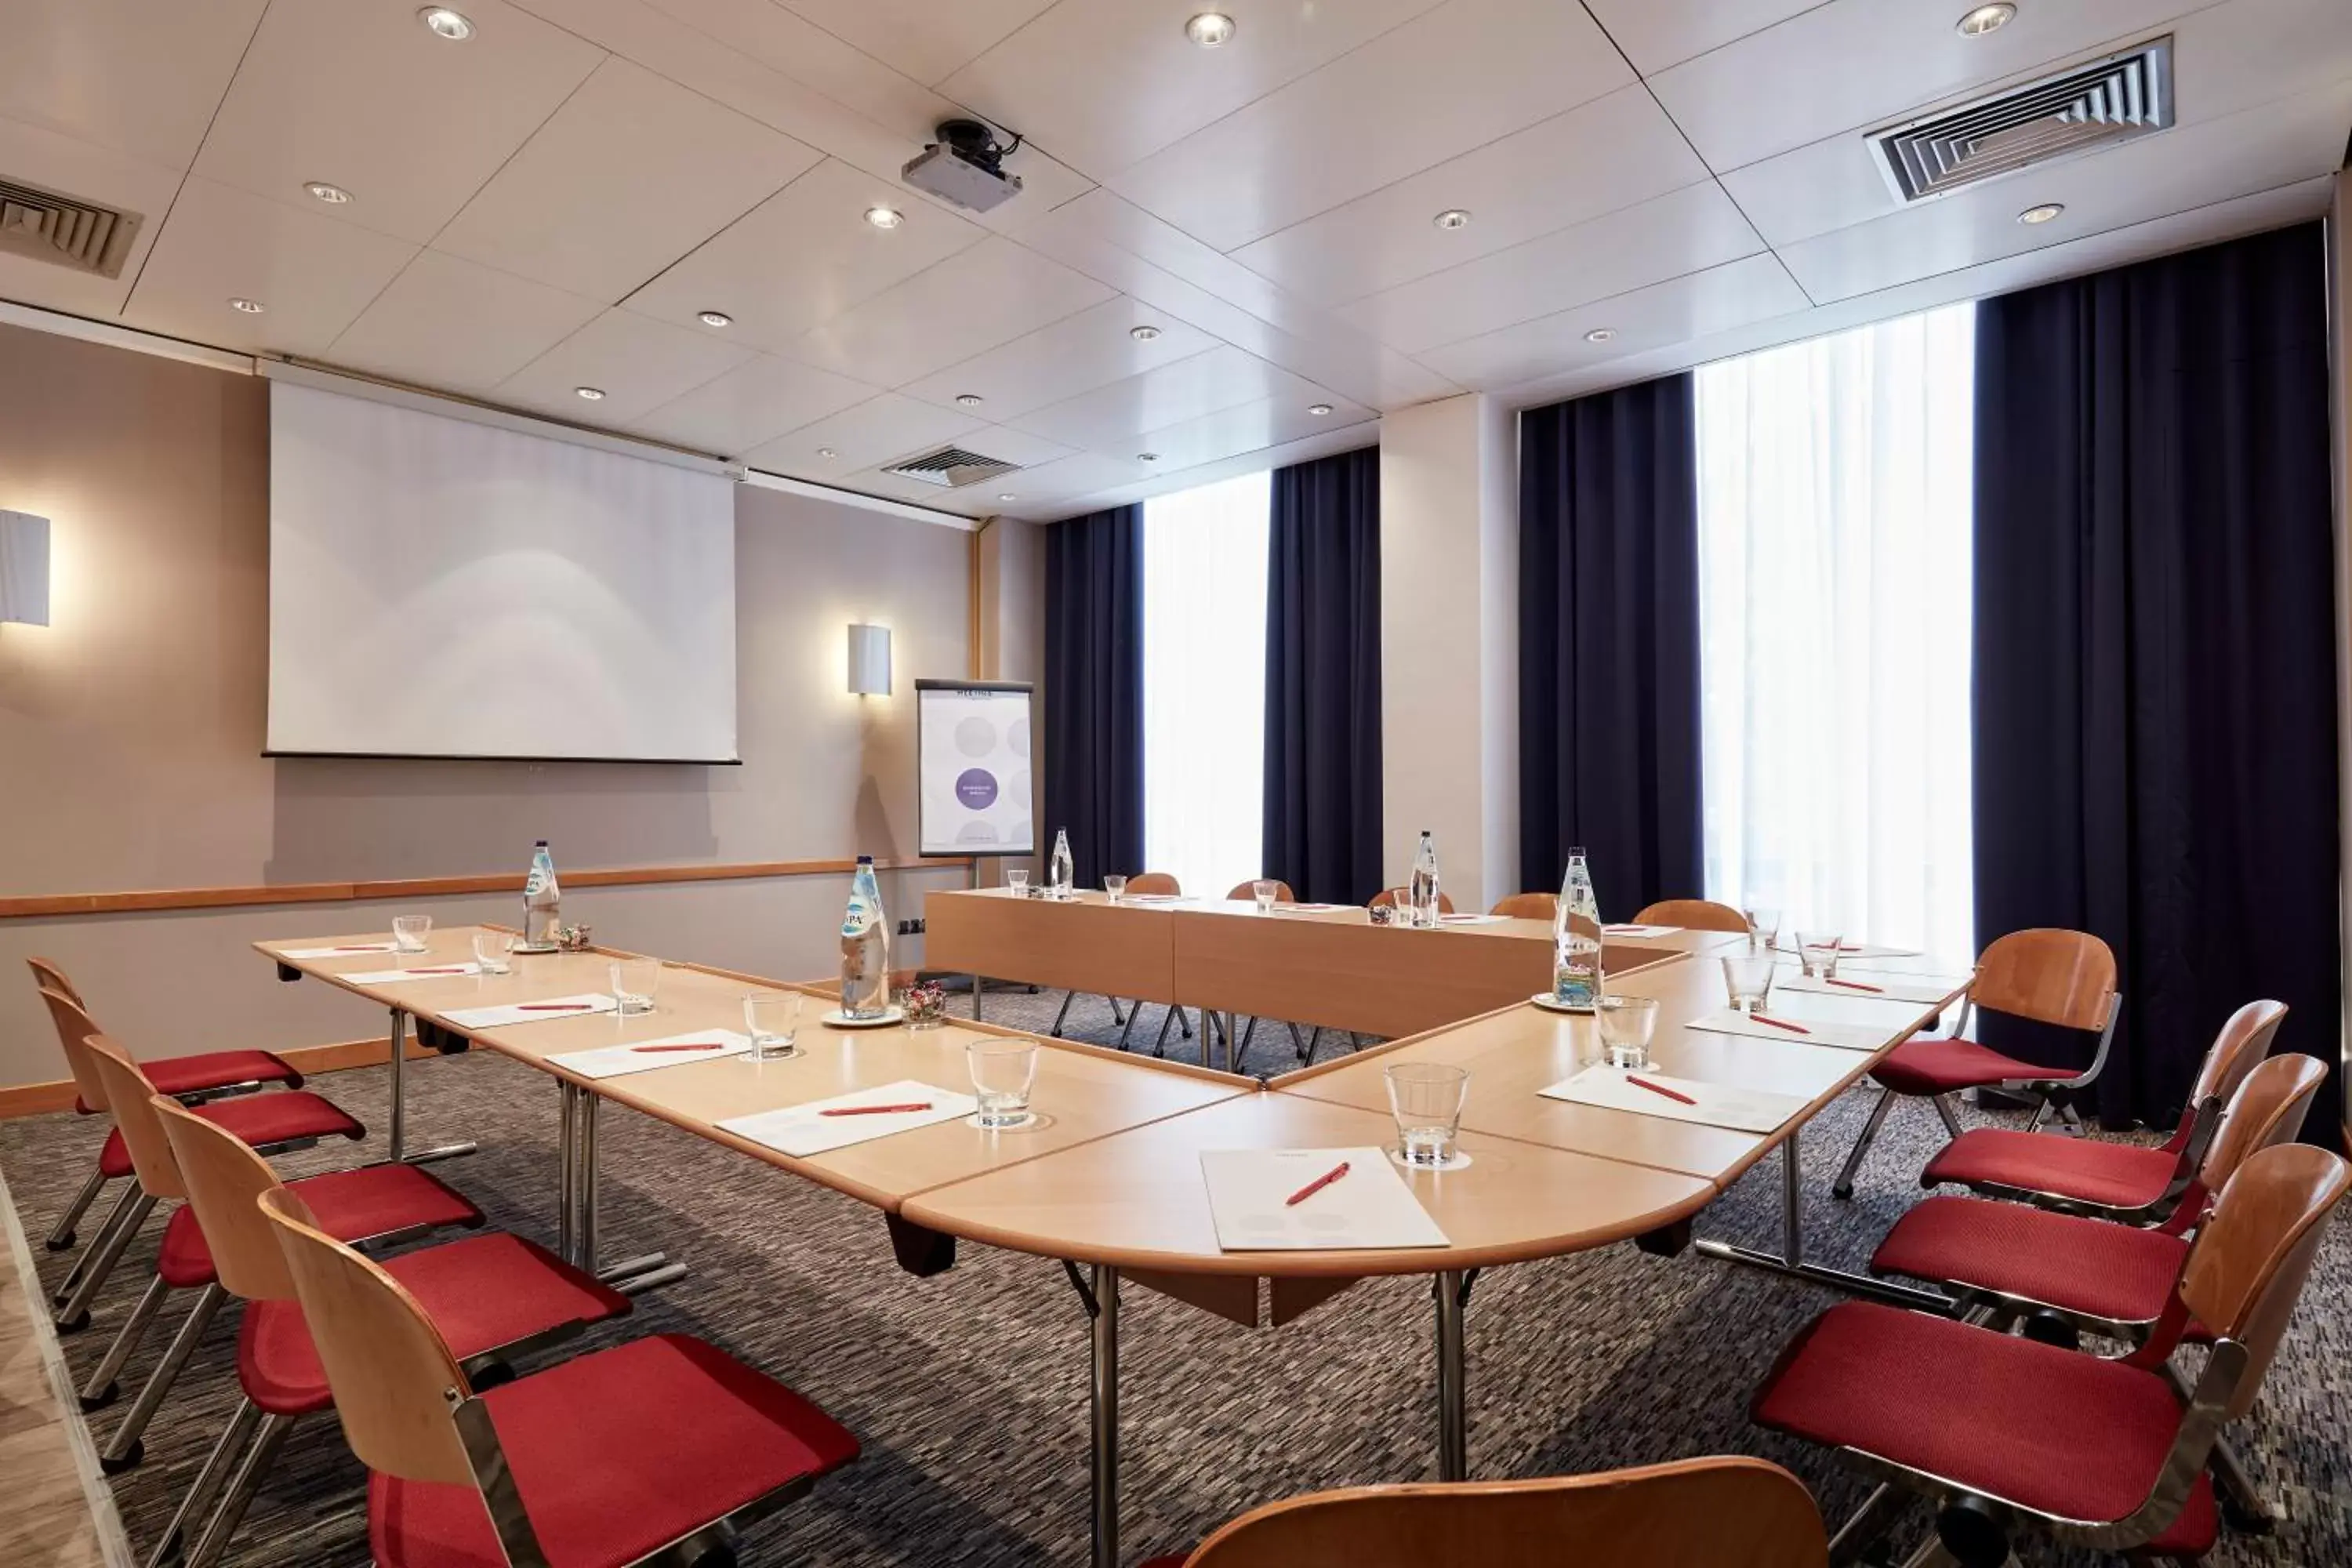 Business facilities in Novotel Athens